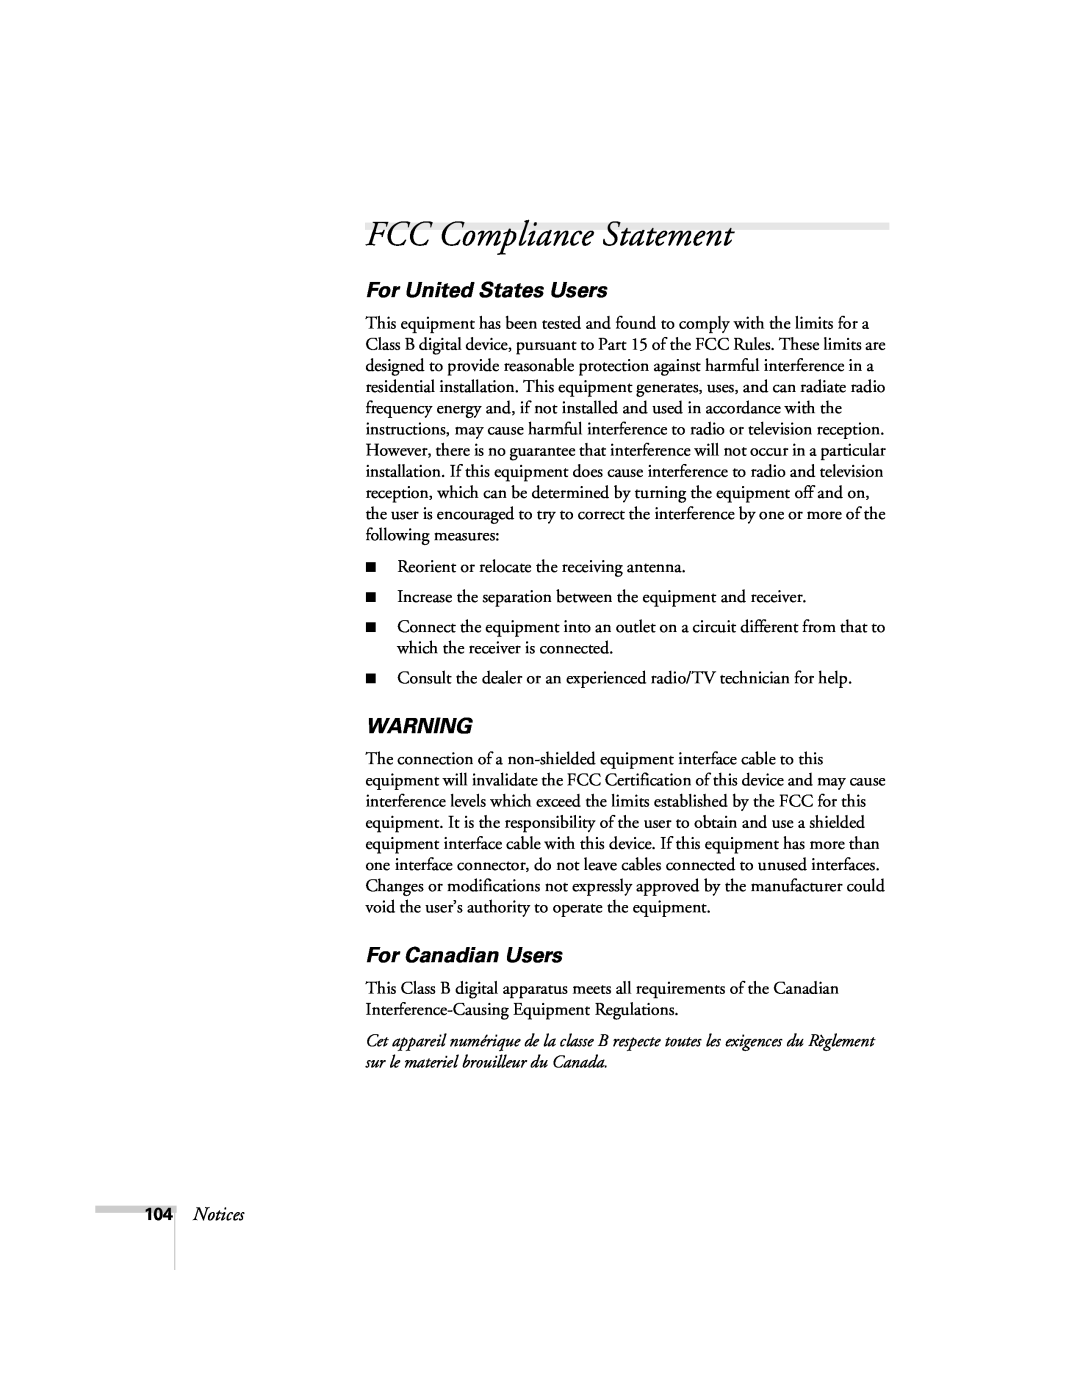 Univex 700 manual FCC Compliance Statement, For United States Users, For Canadian Users, Notices 